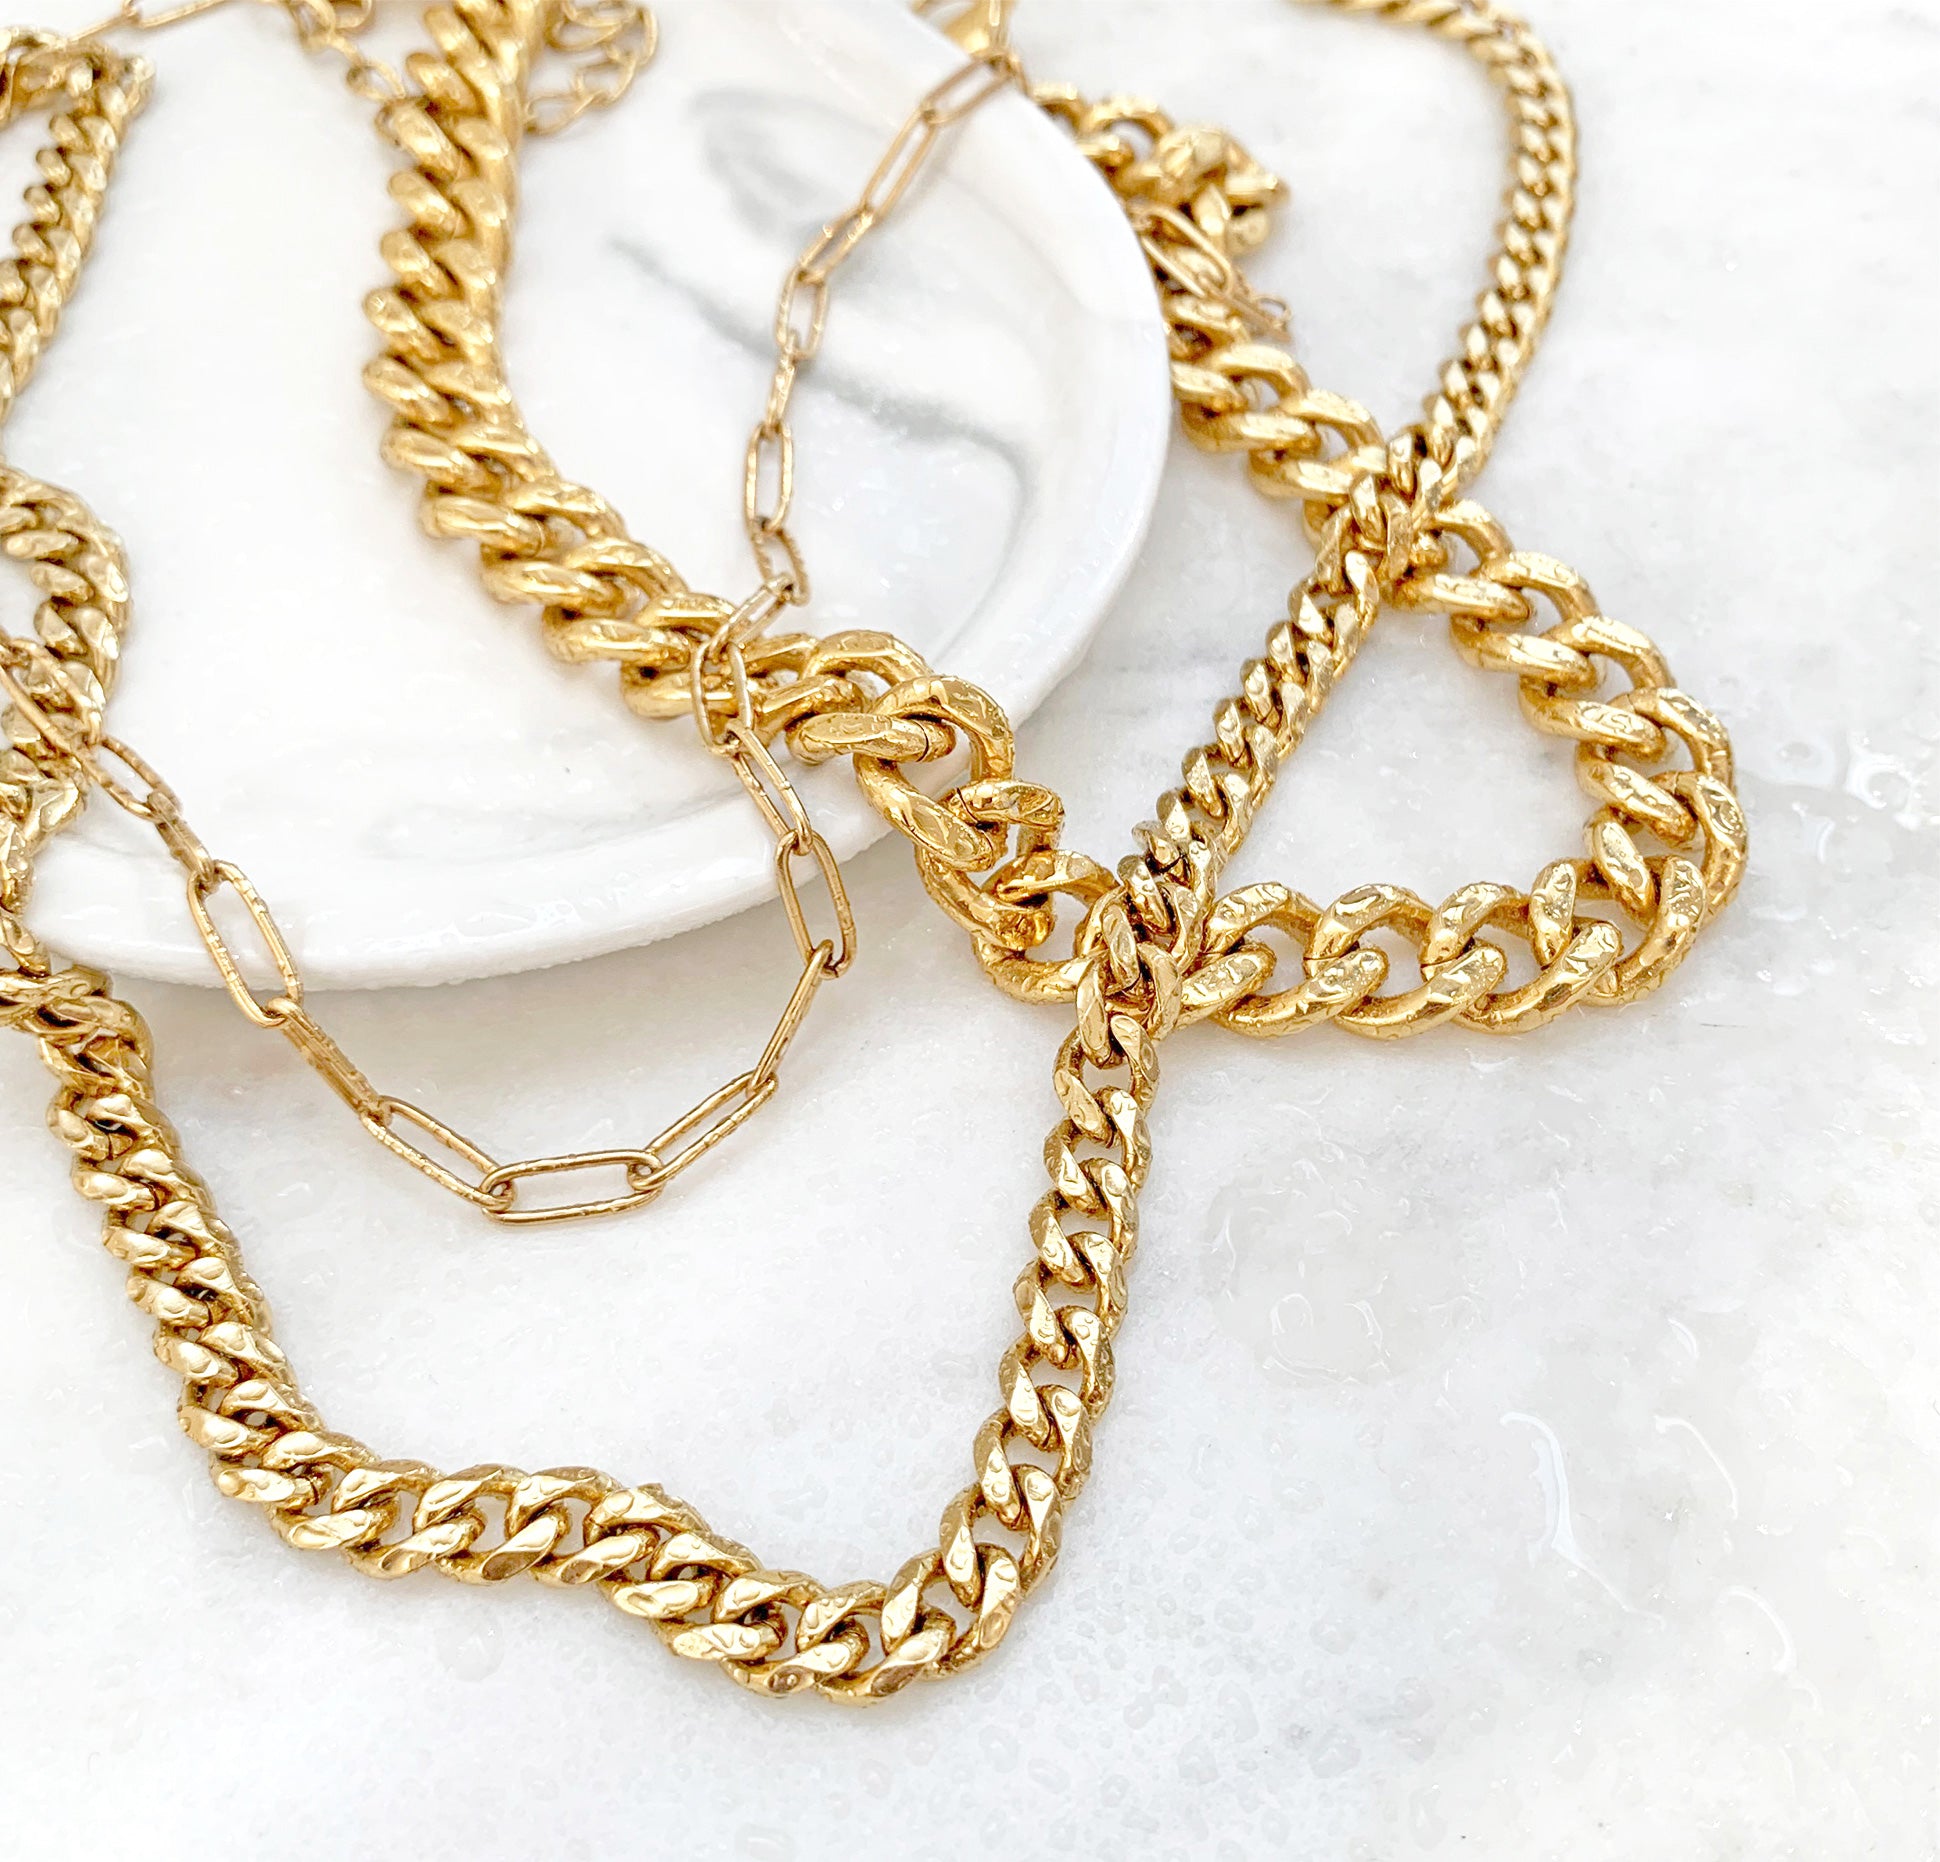 The best gold jewelry on  that doesn't tarnish! Linked my